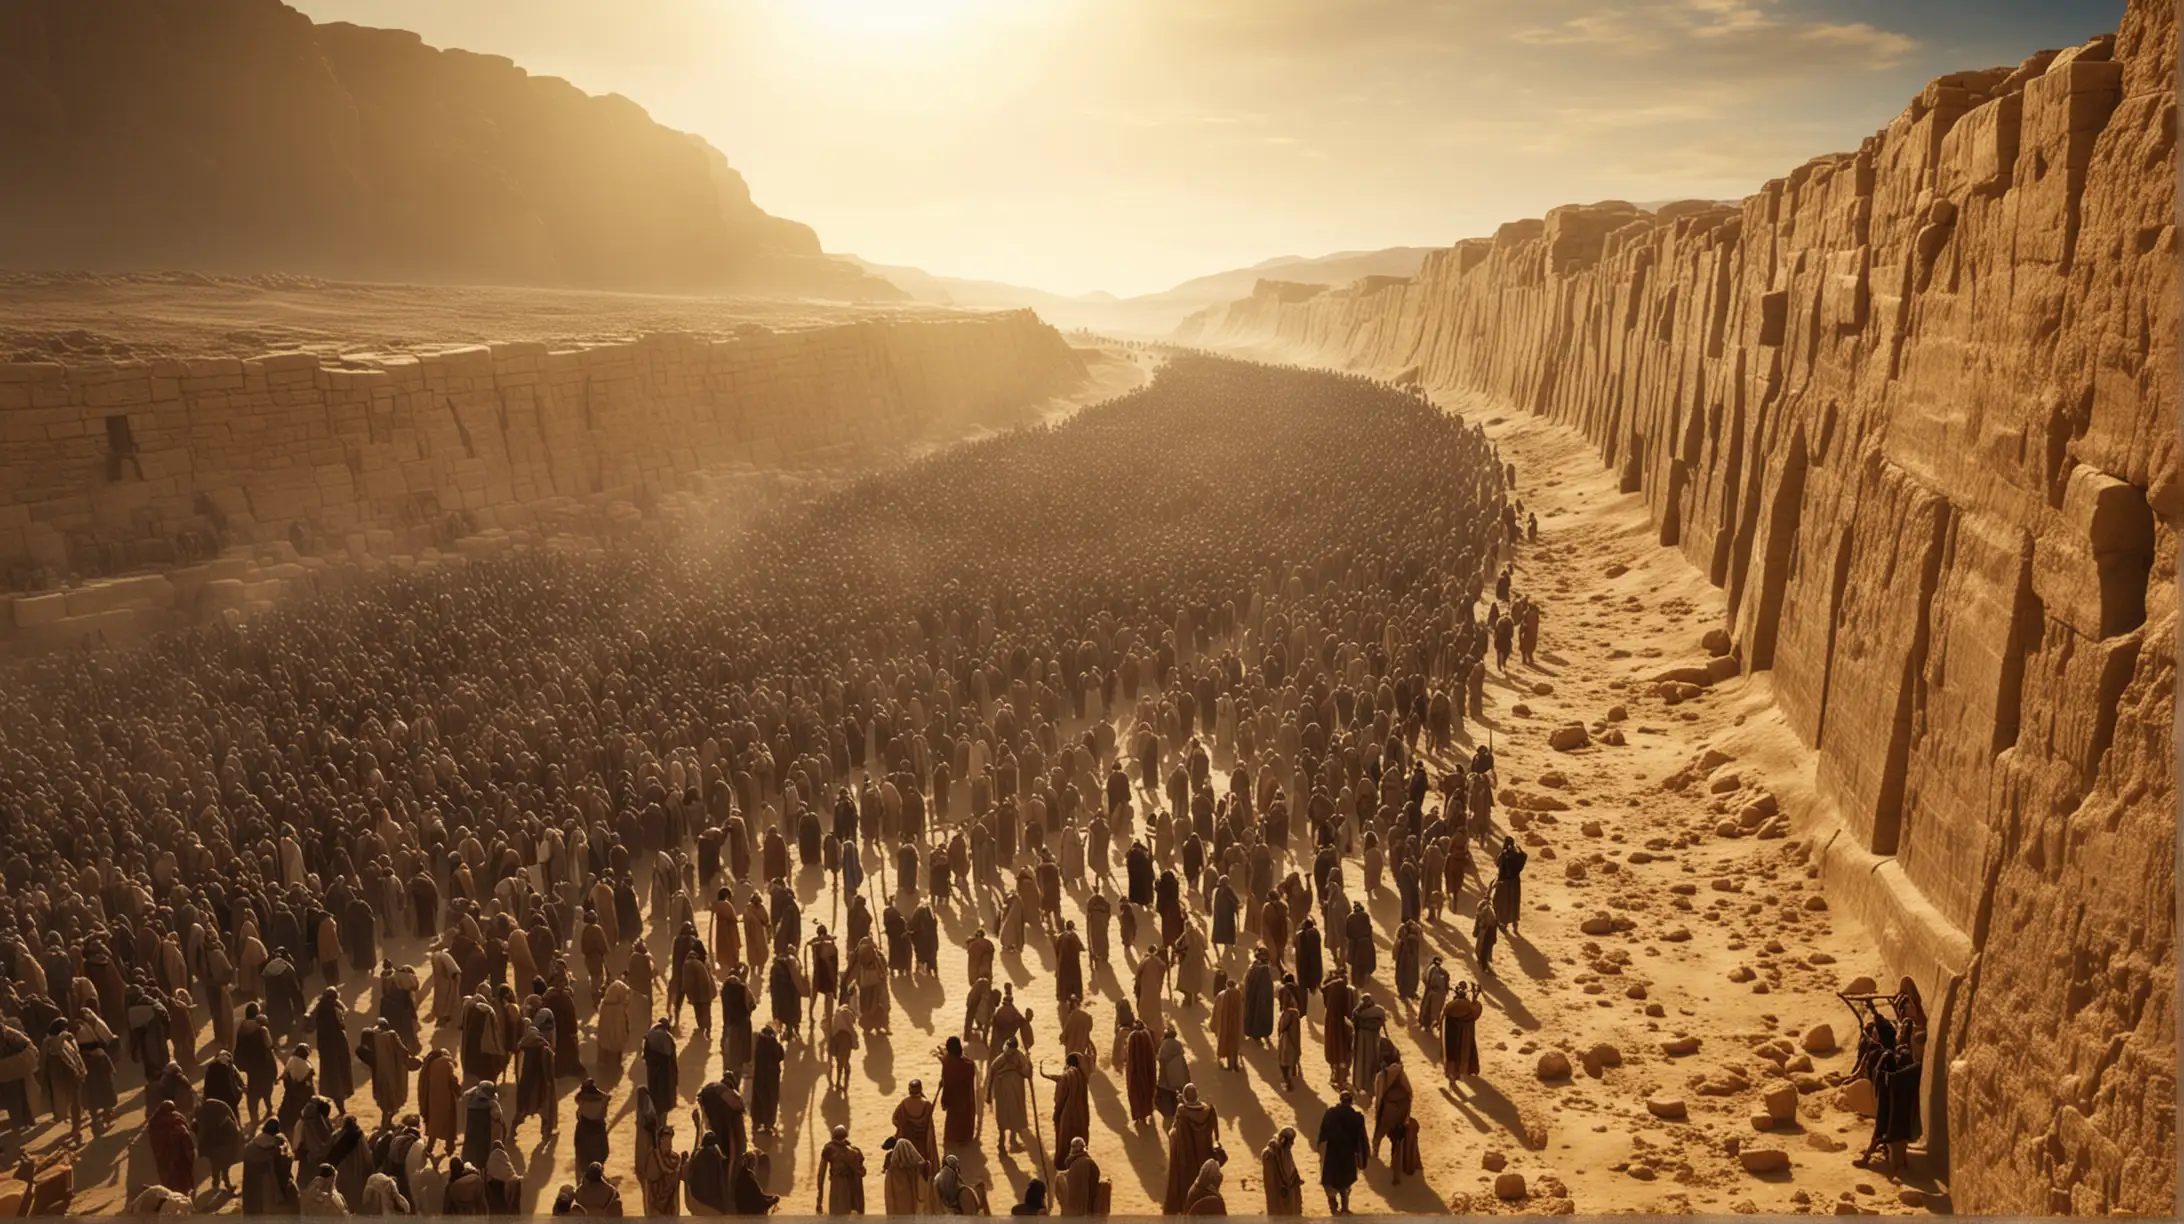 An image that encapsulates the Biblical Book of Exodus.